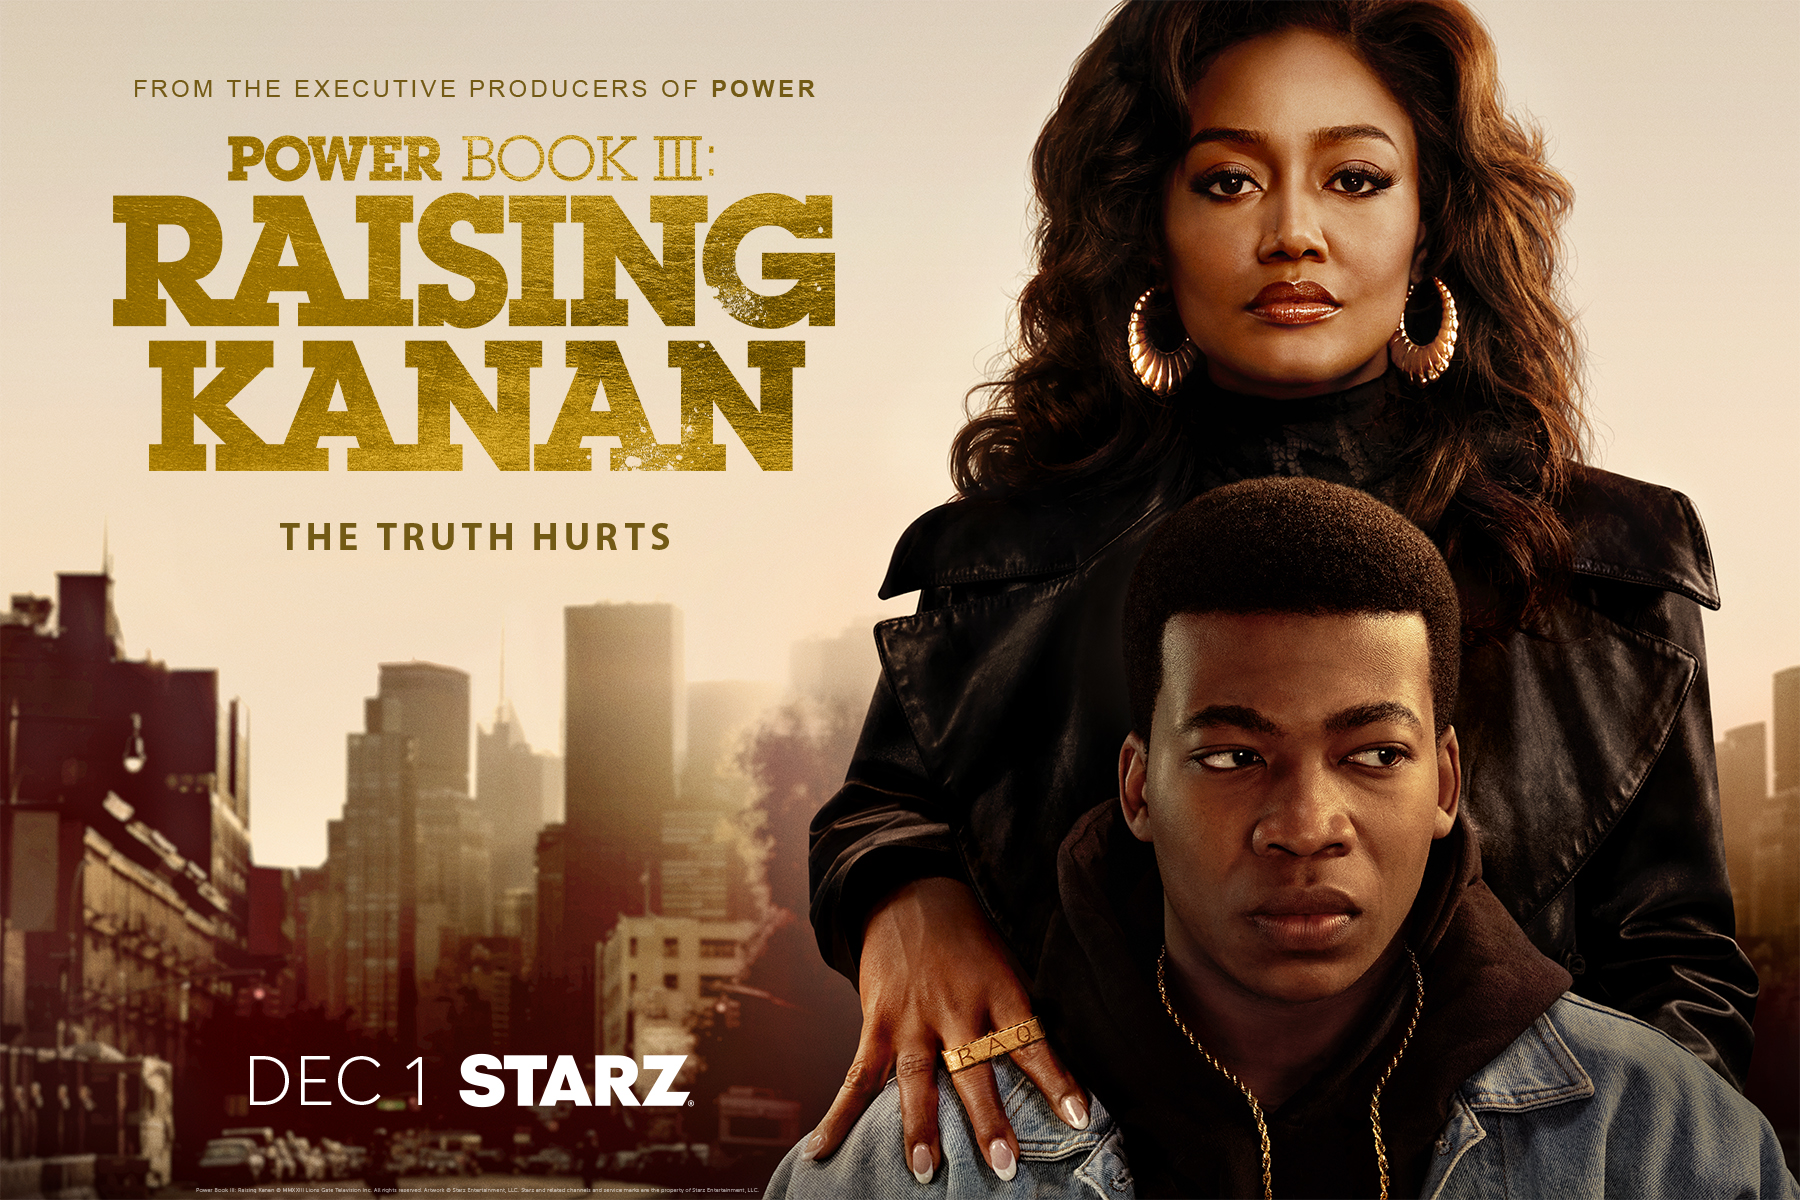 Joey Bada$$ shares how he manifested his role in 'Raising Kanan': I just  decided it was time